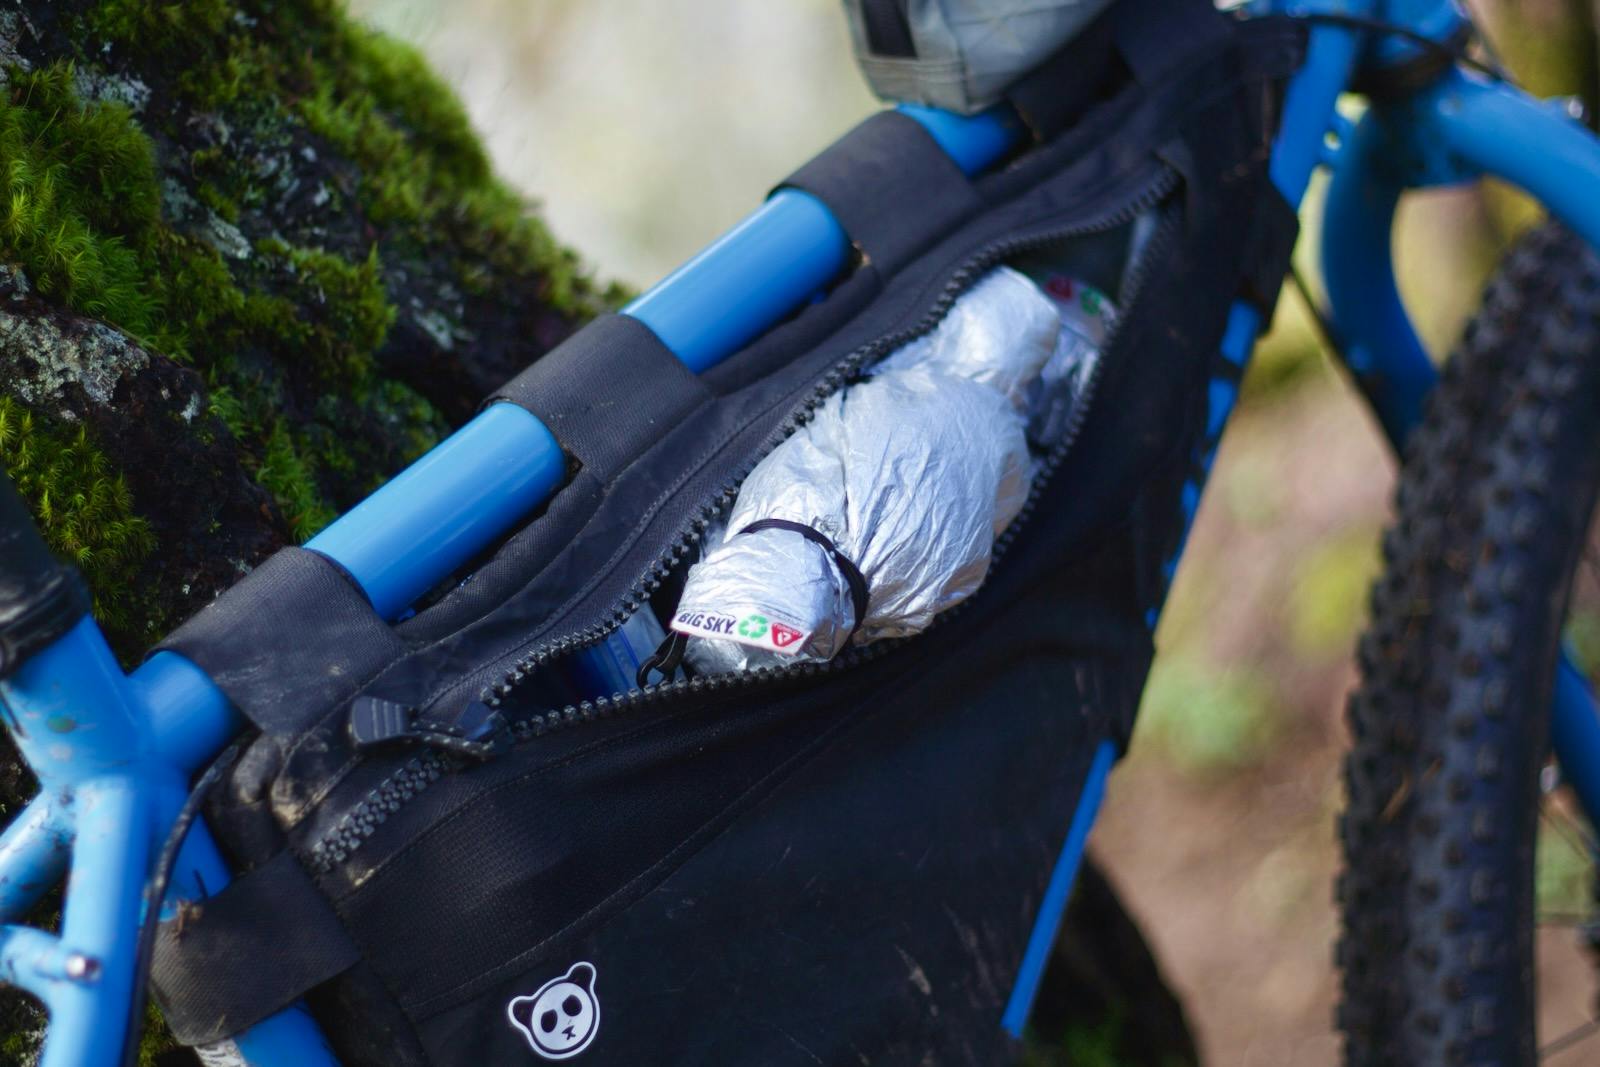 food pouch in framebag